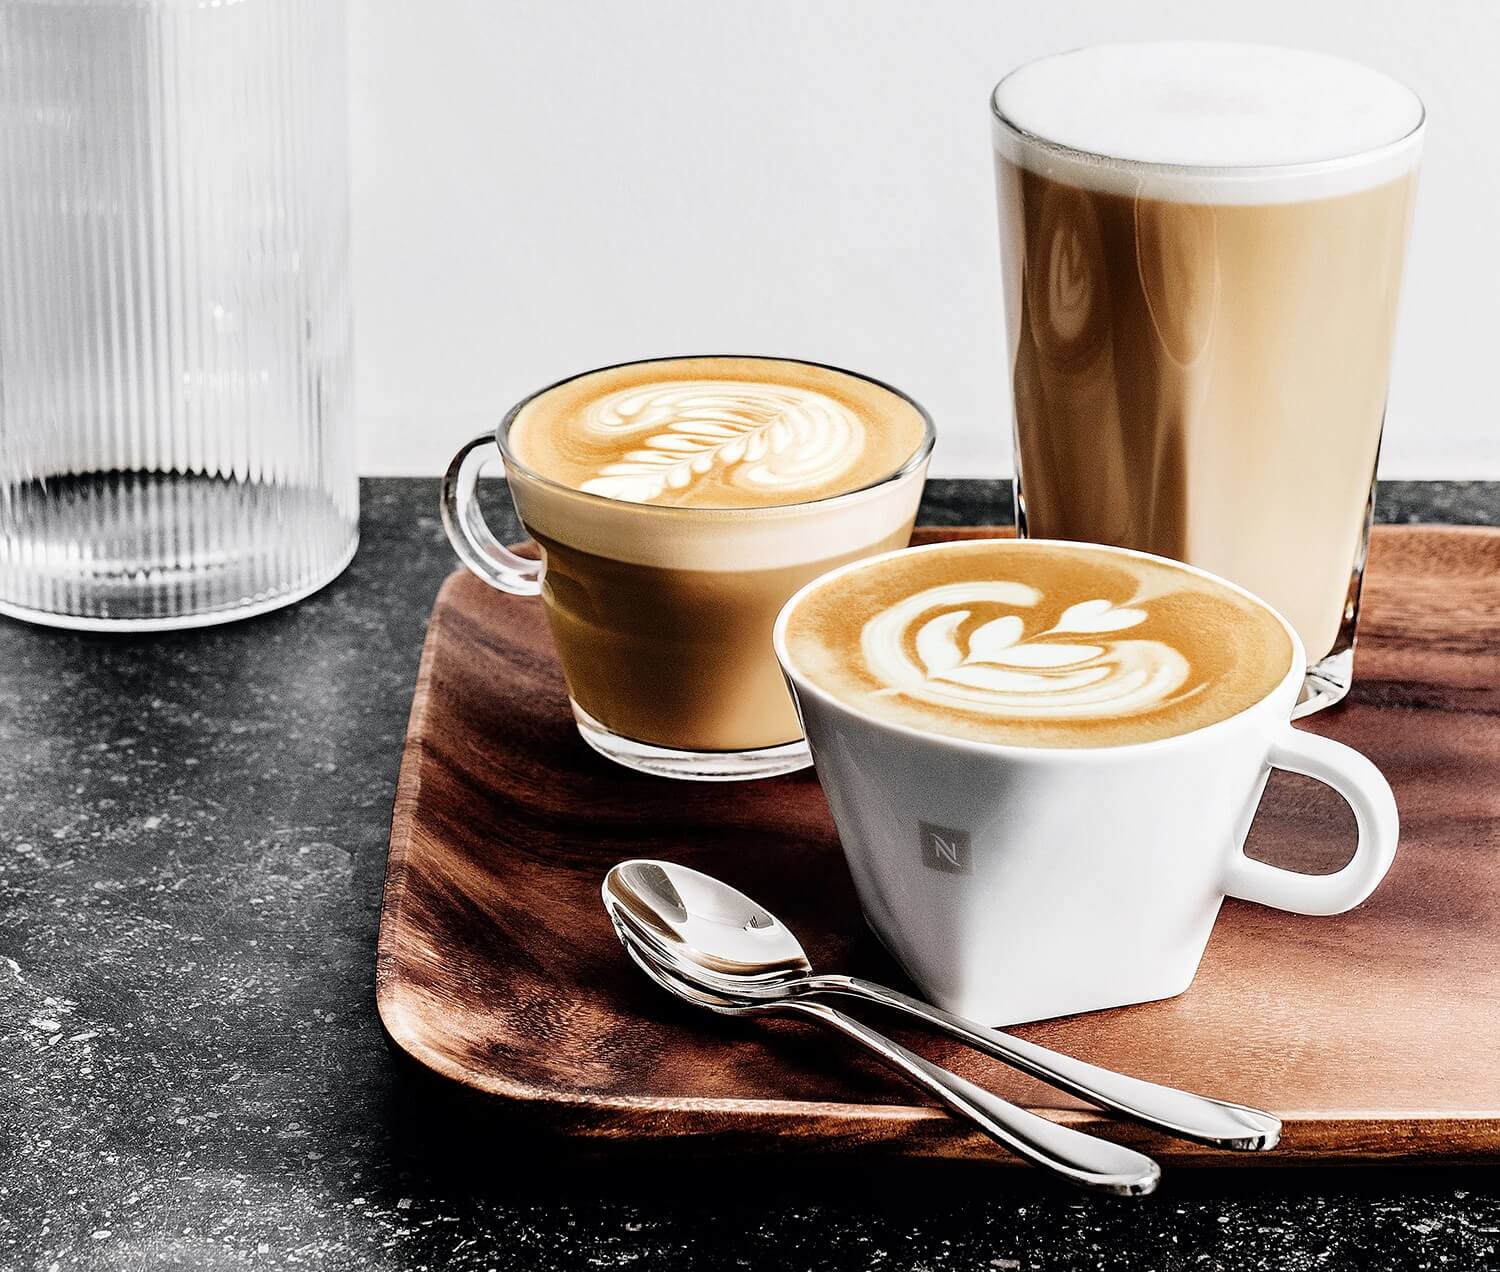 Latte Art The Art Of Creating Shapes With Milk Froth Nespresso